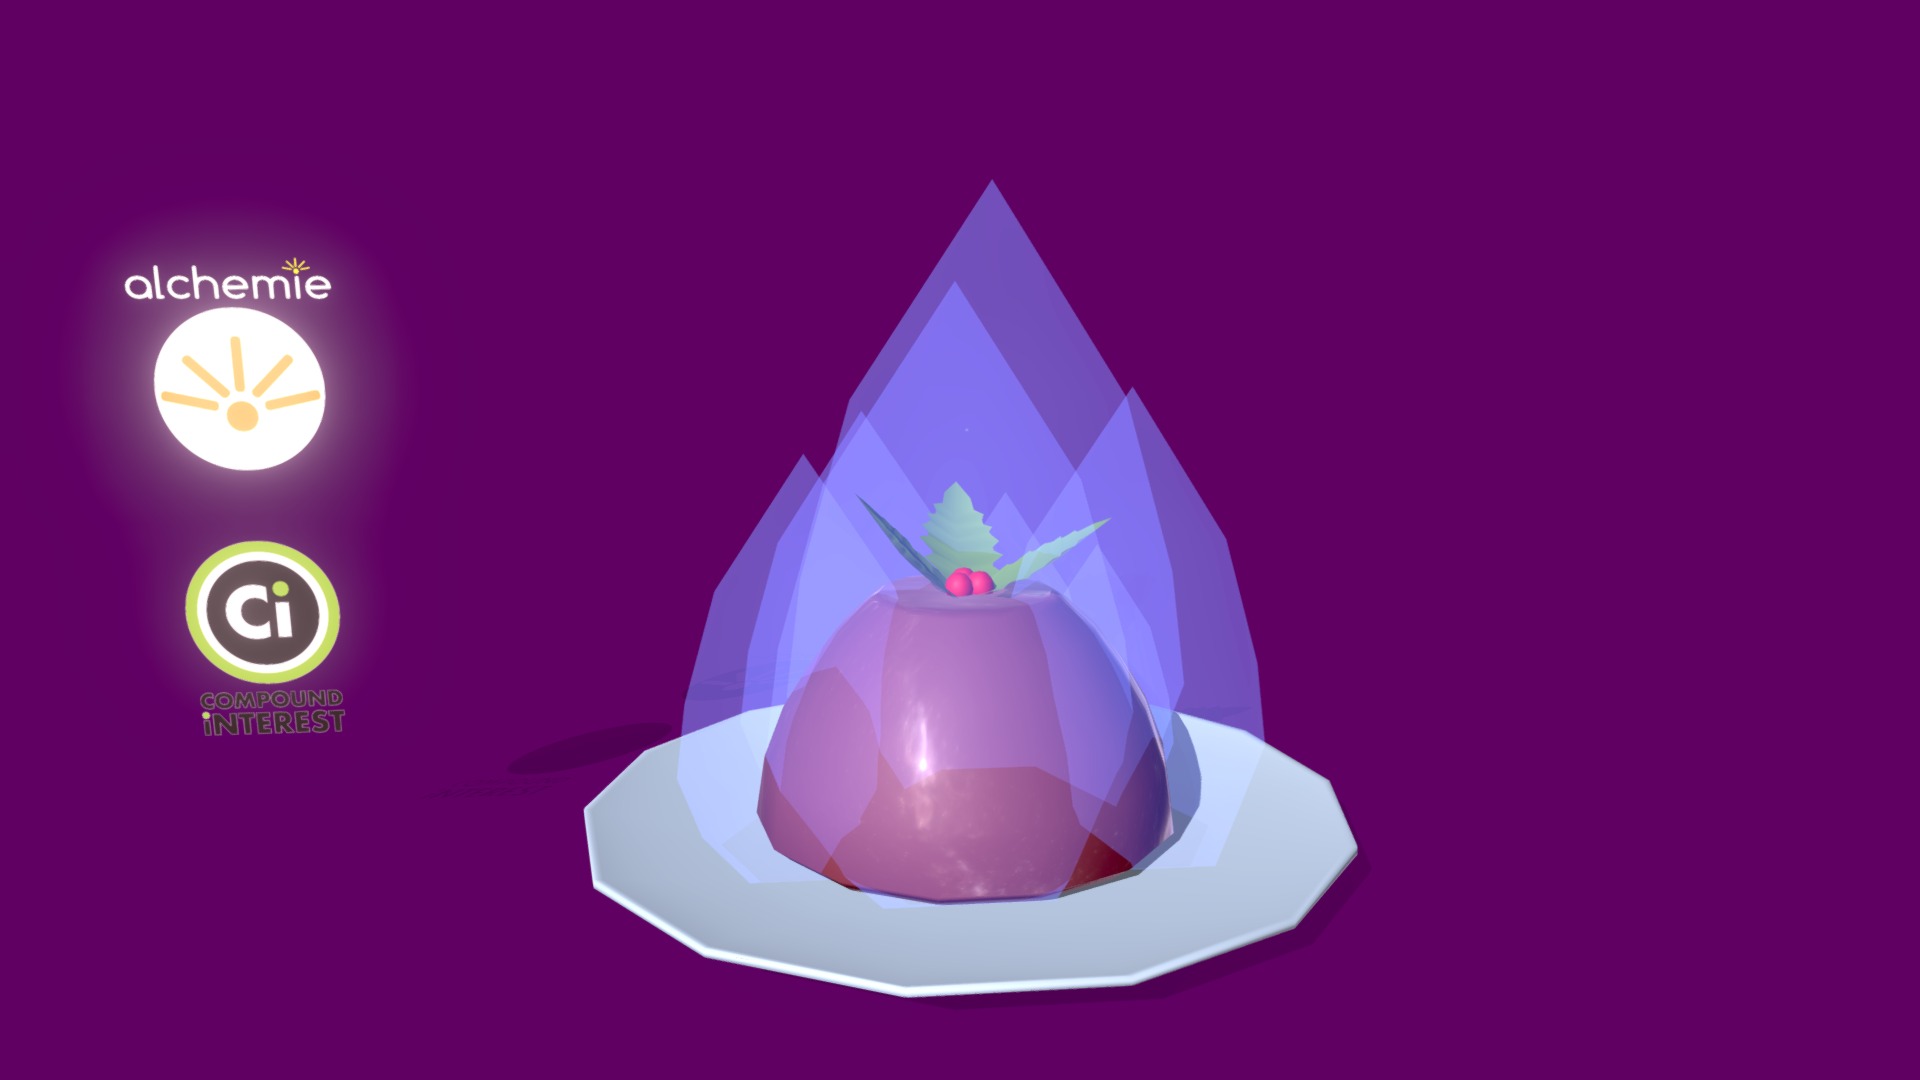 3D model Flaming Pudding – Compound Interest - This is a 3D model of the Flaming Pudding - Compound Interest. The 3D model is about icon.